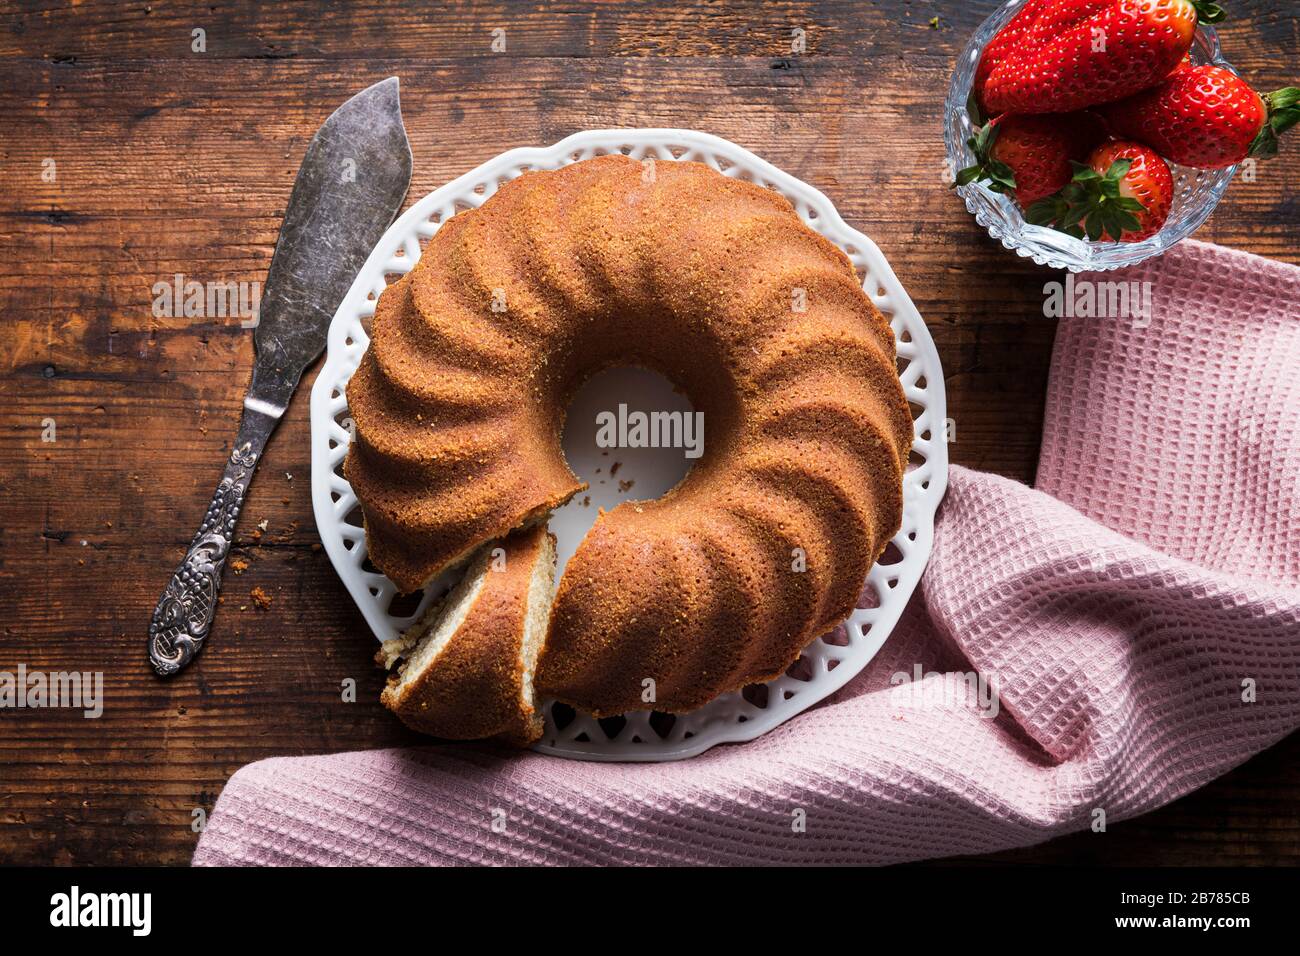 Kugelhupf, bundt cake or sockerkaka on a rustic old wooden table. With a bowl of strawberries, a pink napkin and a vintage cake cutter. Seen from abov Stock Photo